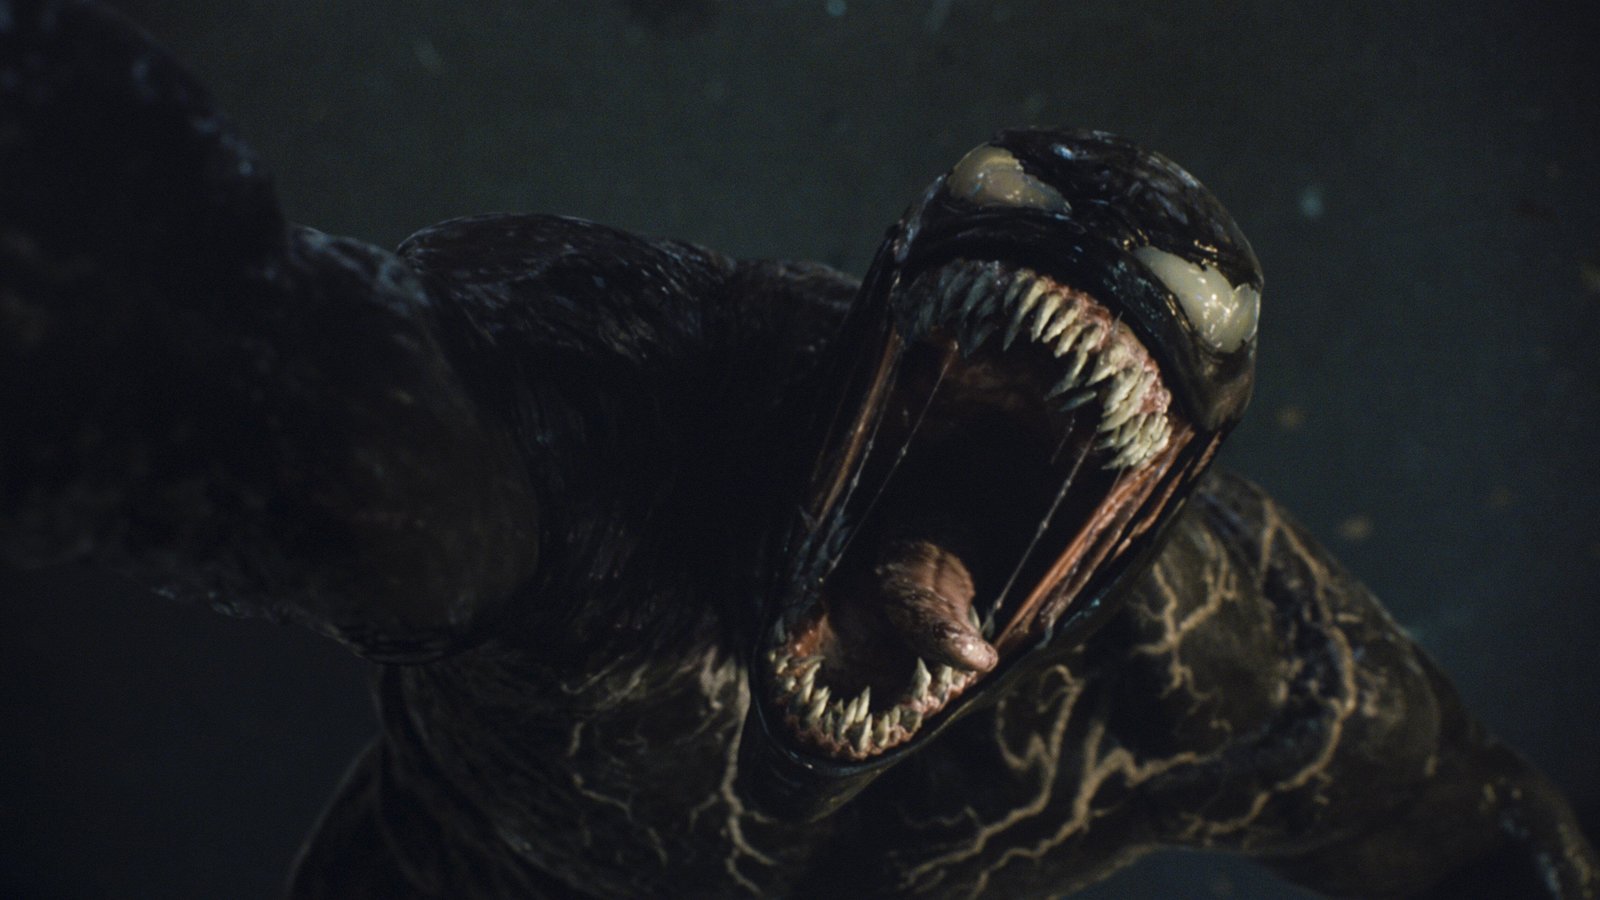 Venom: Let There Be Carnage (4K Ultra HD)